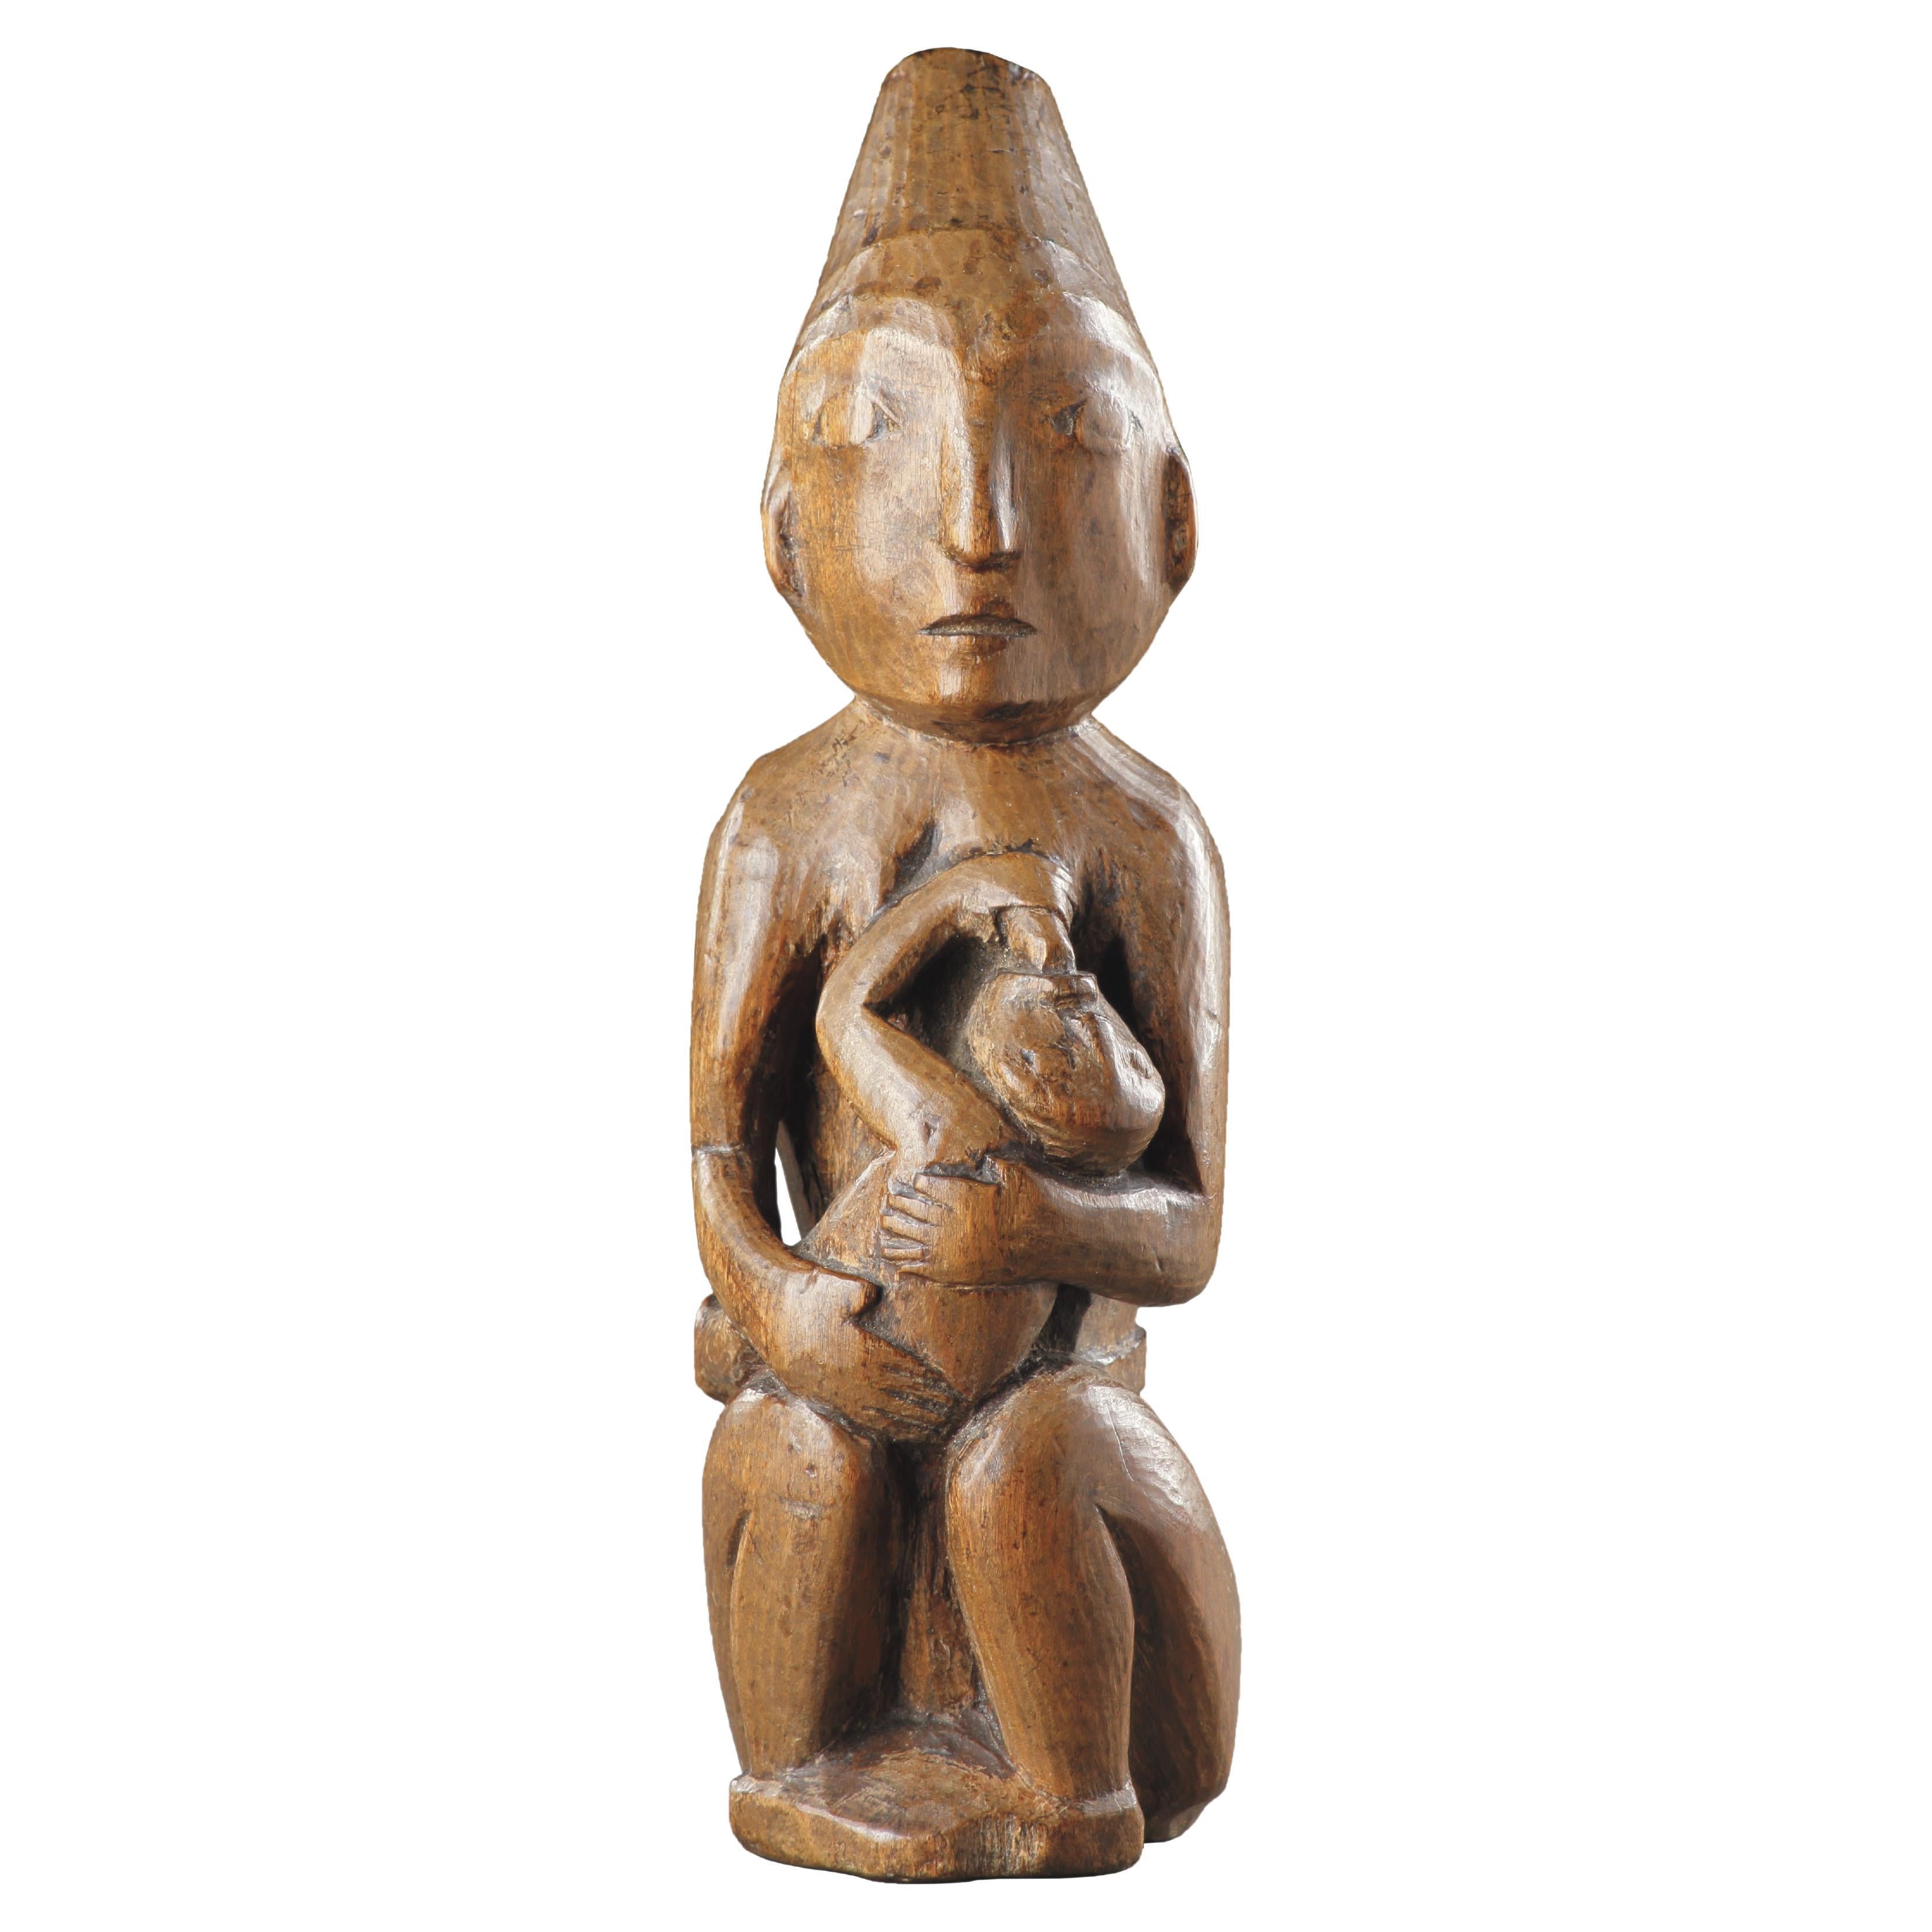 A Very Rare and Early Northwest Coast Maternity Figure For Sale